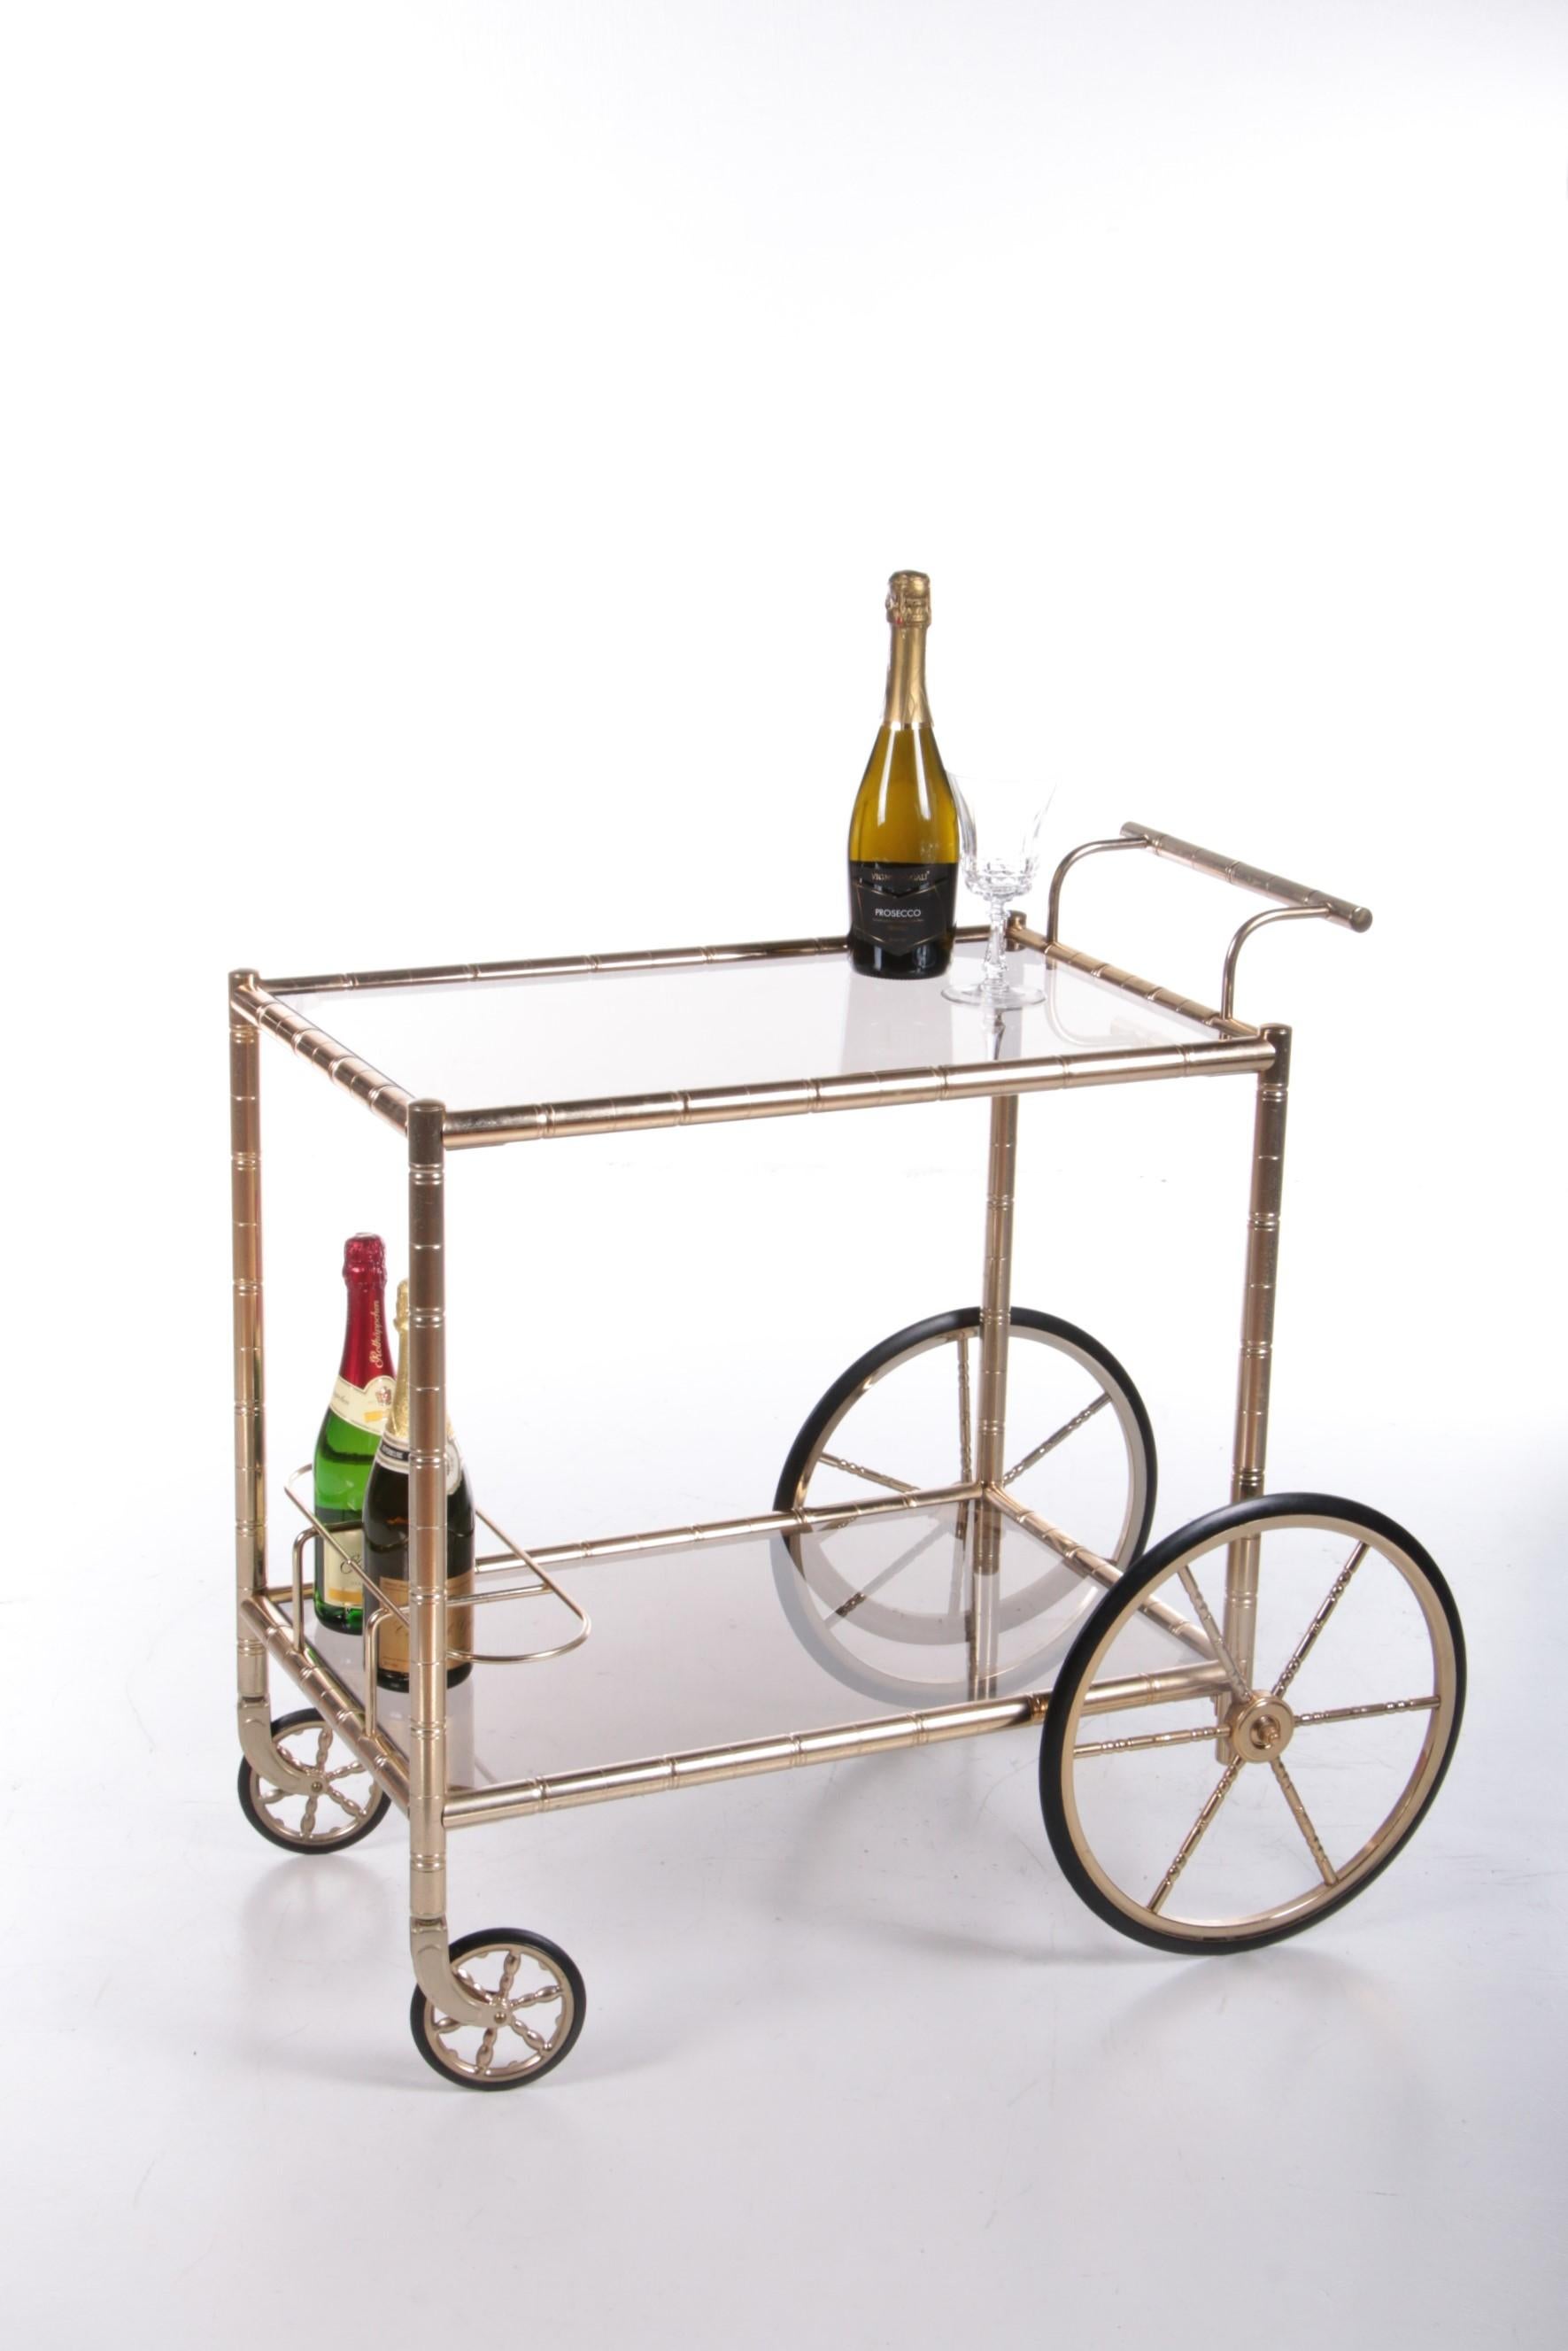 A beautiful trolley with gold accents and two beautiful glass tabletops.

Two racks have been installed on the lower level to store a bottle of wine or other drinks.

The table tops are made with beautiful and sturdy glass plates. They also call